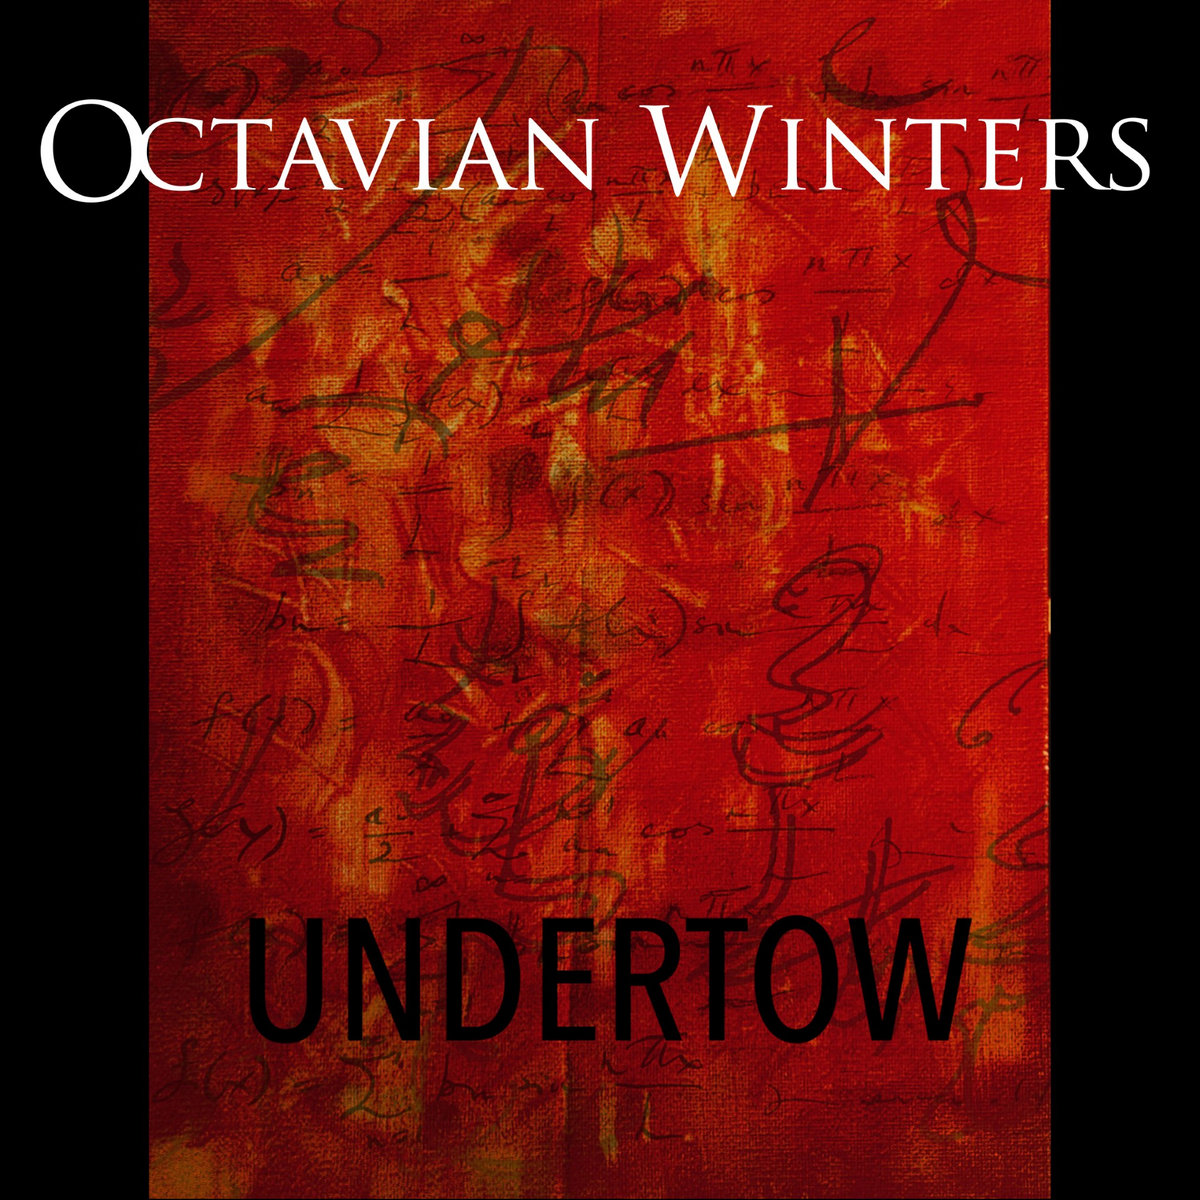 Post-punk shivers – Octavian Winters – The Line of Curve EP